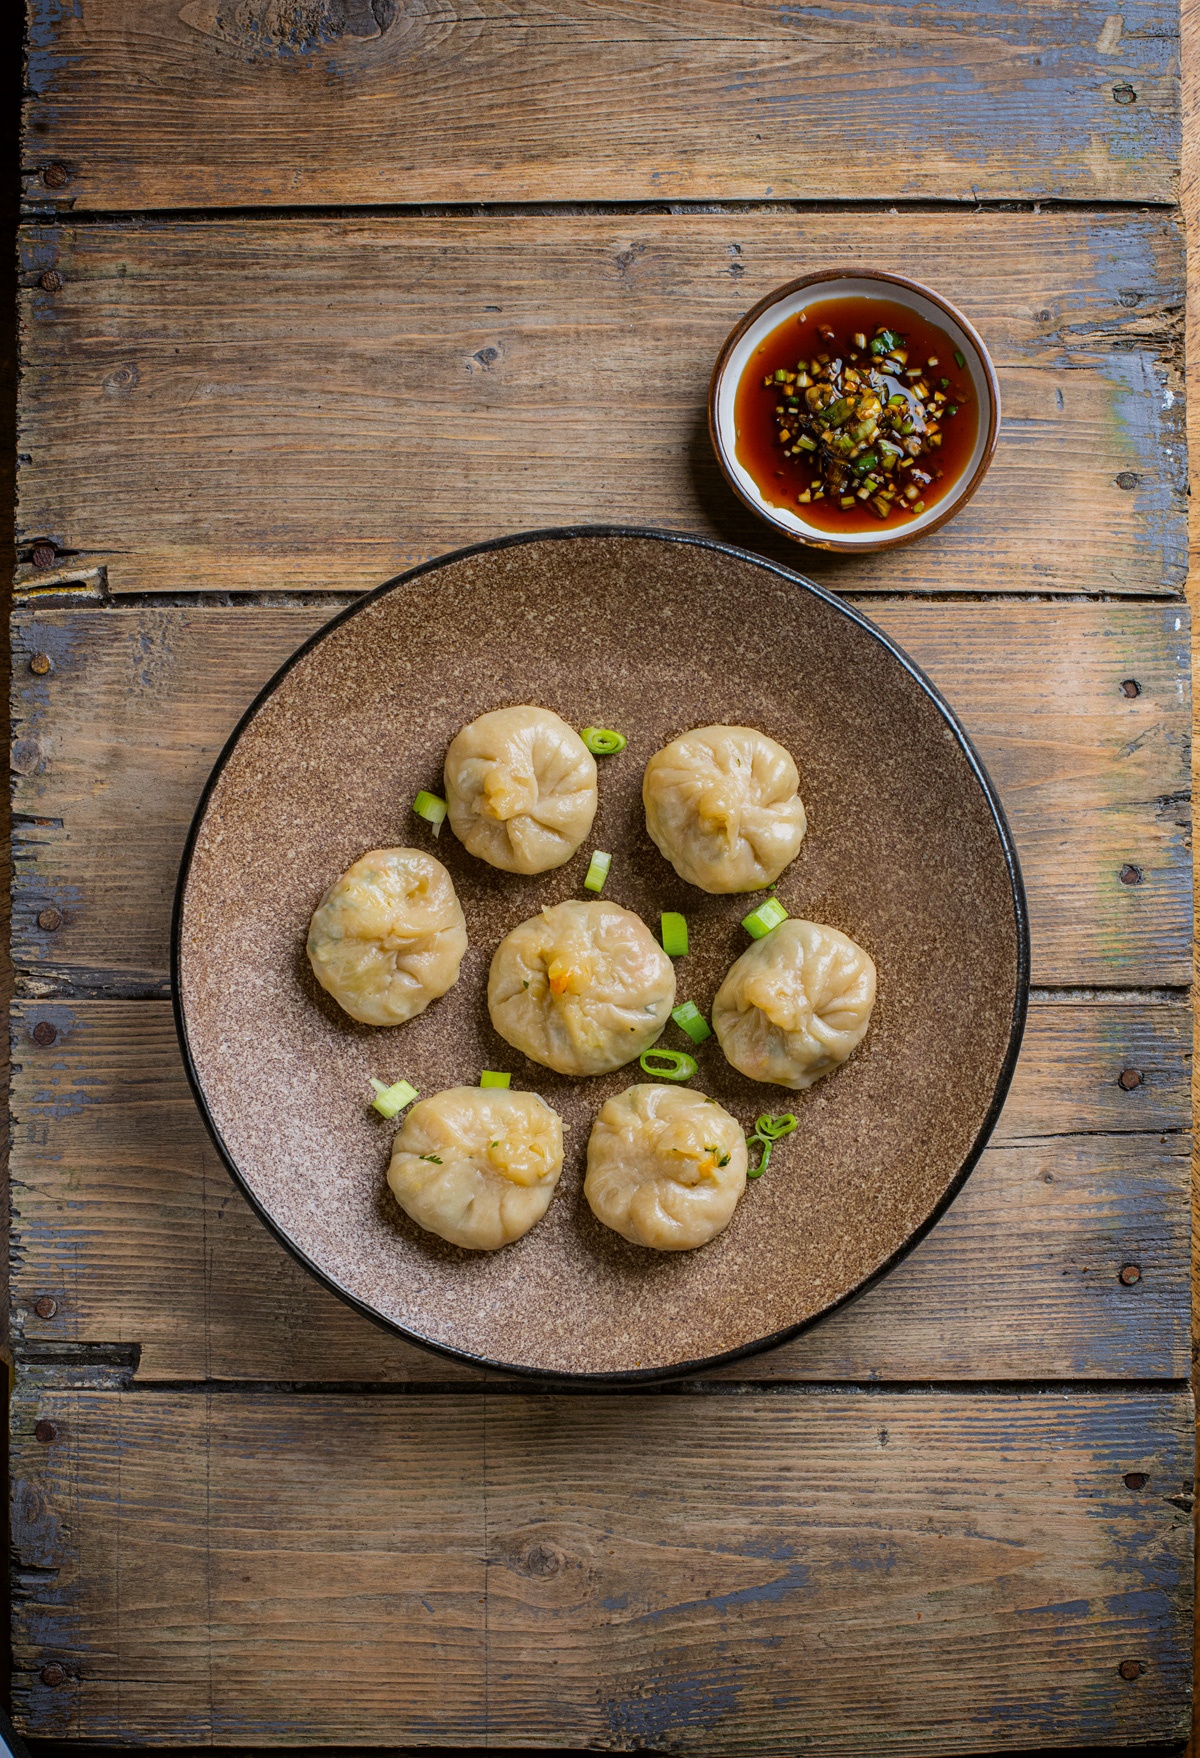 Image of Romy Gill's Momos